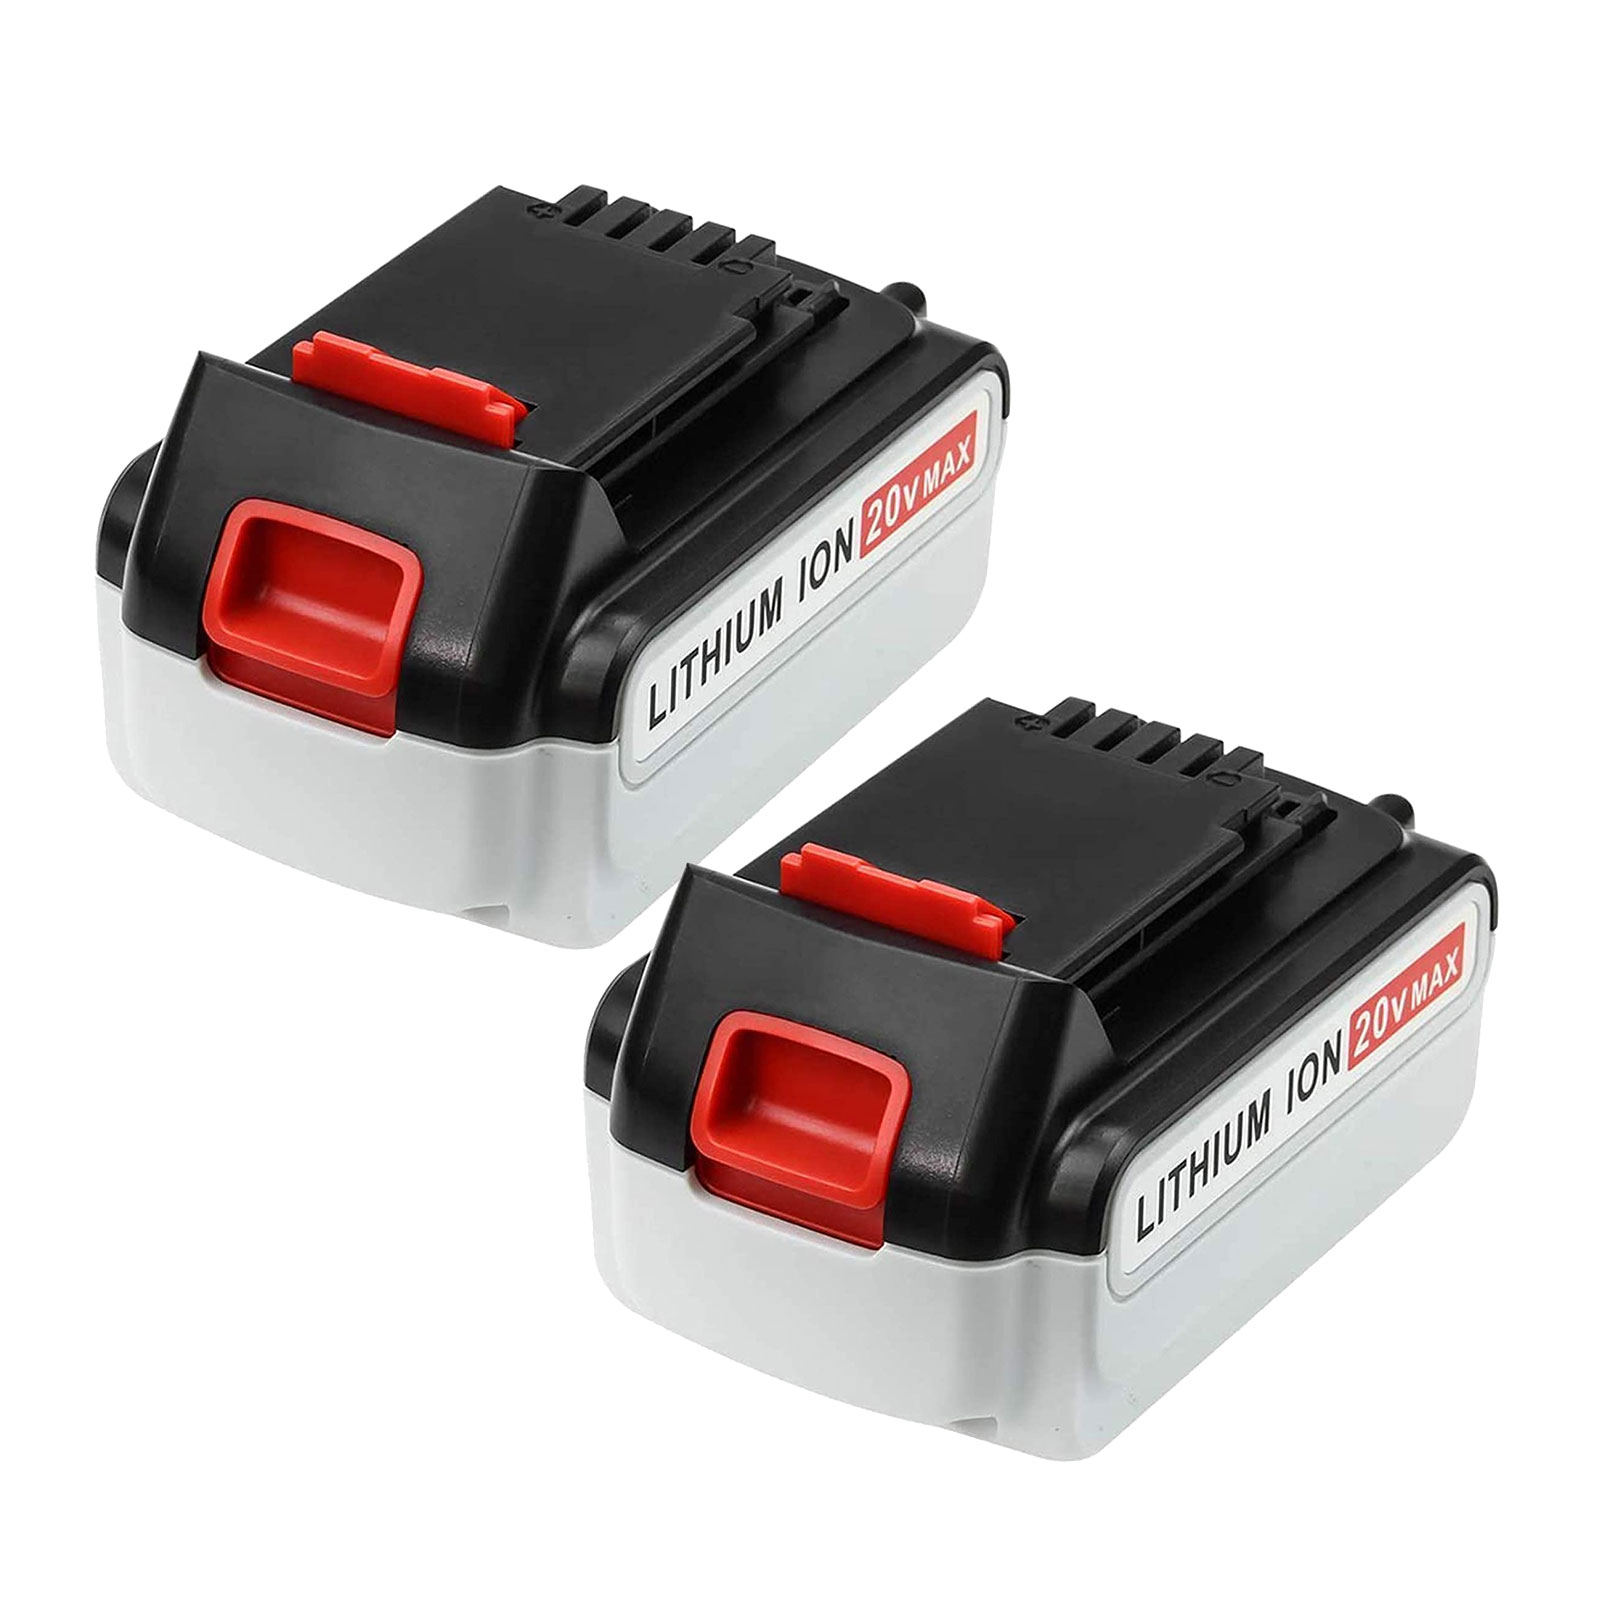 2Packs LBXR20 20 Volt 4.0Ah Replacement Battery Compatible with Black and Decker 20V Lithium Battery Max LB20 LBX20 LST220 LBXR2020-OPE LBXR20B-2 LB2X4020 Cordless Tool Batteries - image 1 of 7